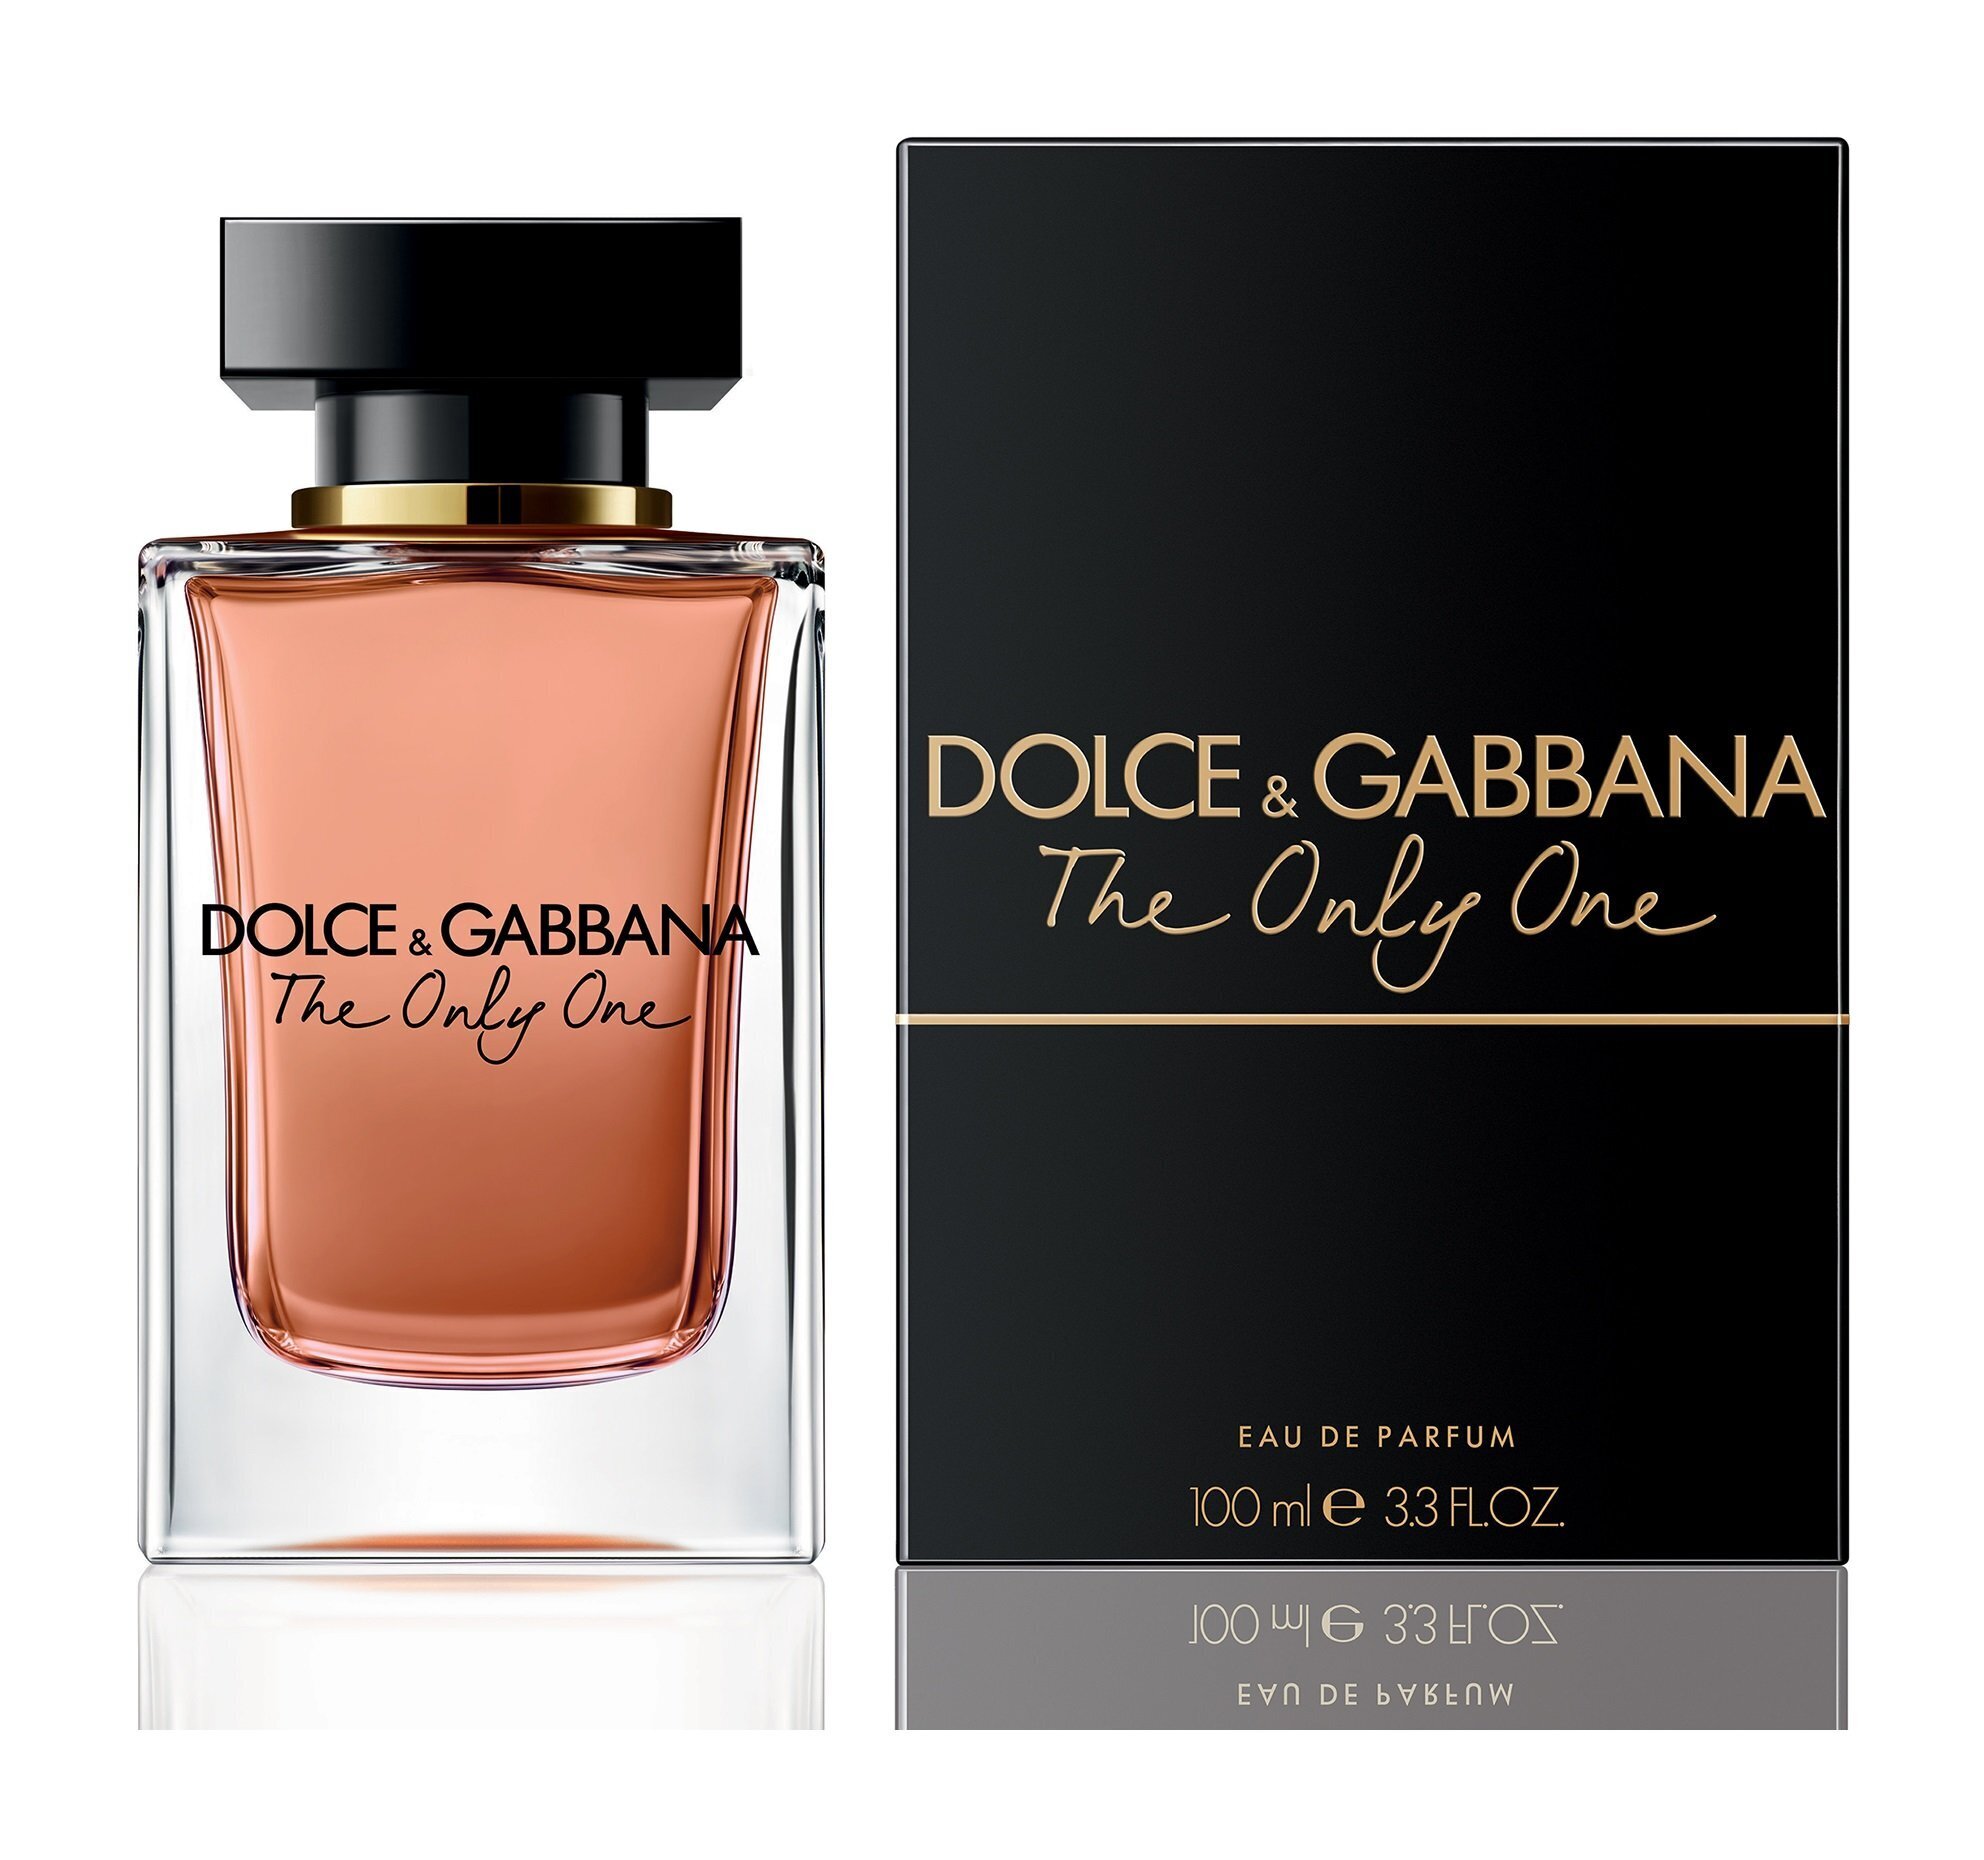 Dolce & Gabbana the only one, EDP., 100 ml. Dolce & Gabbana the only one EDP 50 ml. Dolce Gabbana the only one 100ml. Dolce Gabbana the only one 50ml. Dolce gabbana 1